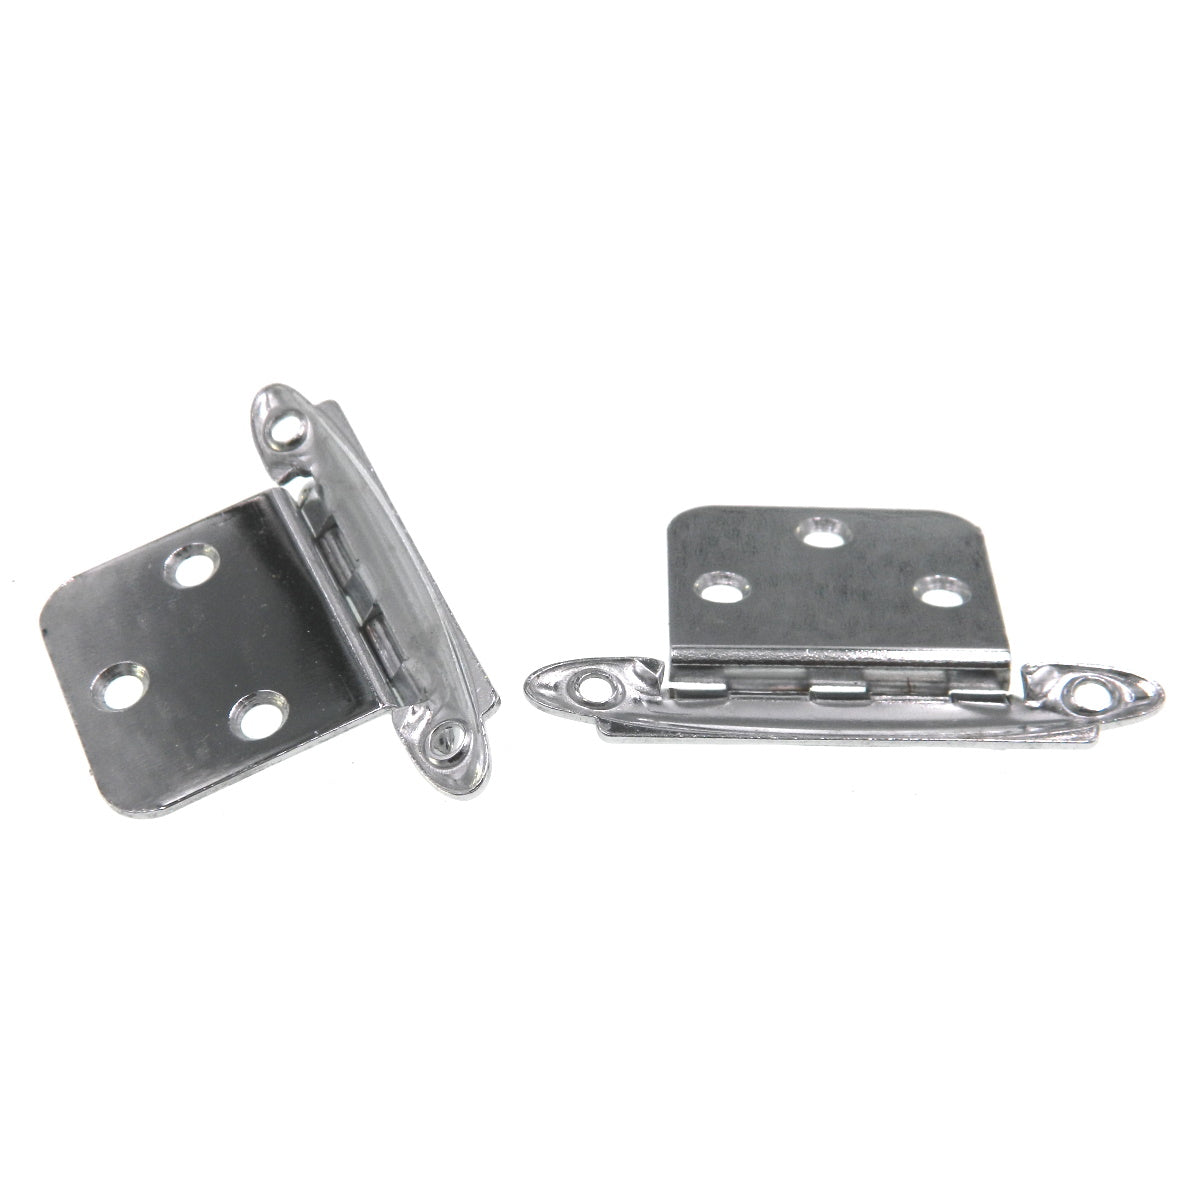 Pair Amerock Polished Chrome Variable Overlay Hinges Non Self-Closing BP7680-26